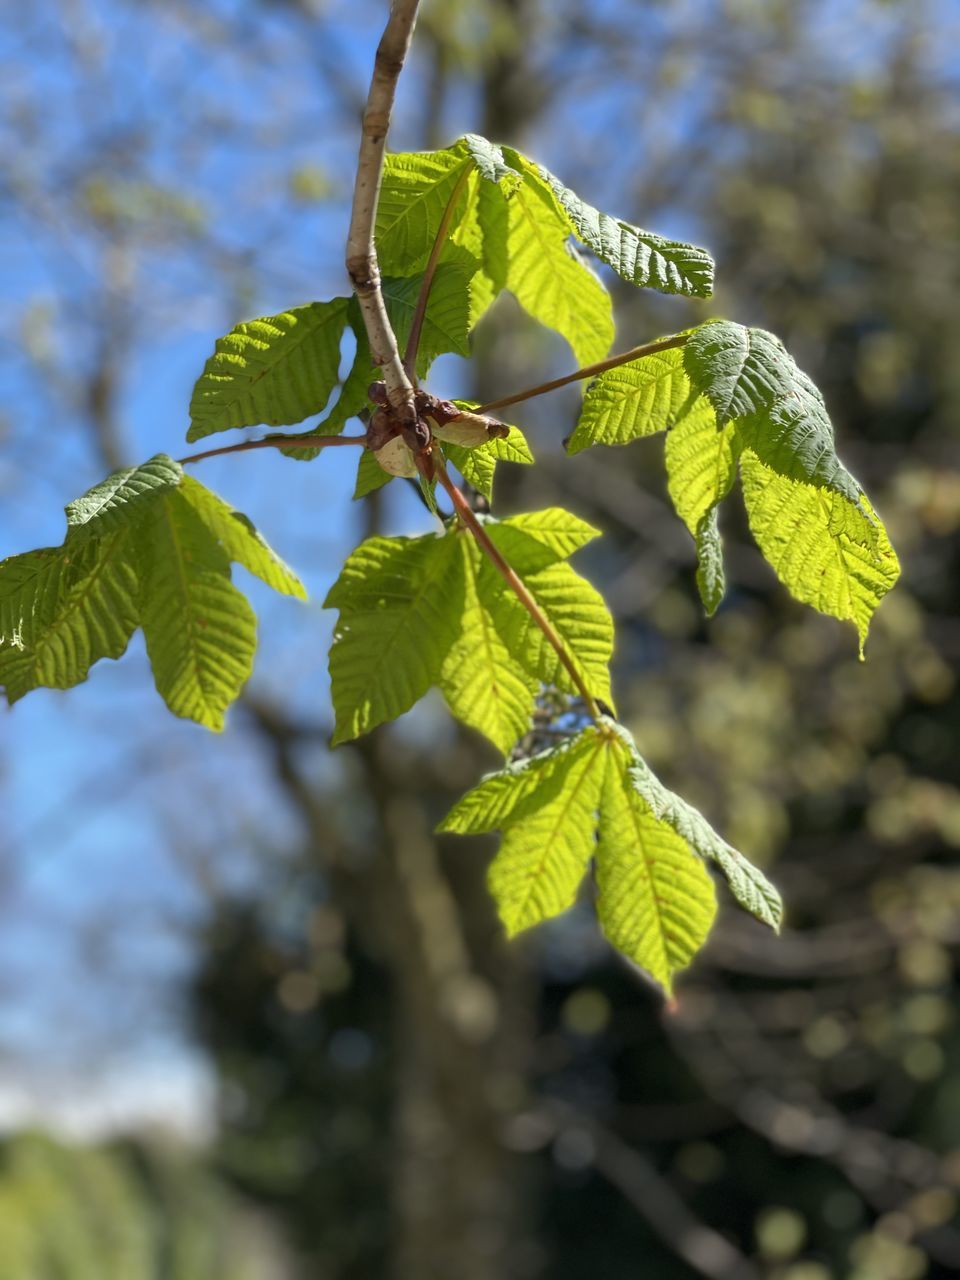 CLOSE-UP OF LEAVES ON TREE